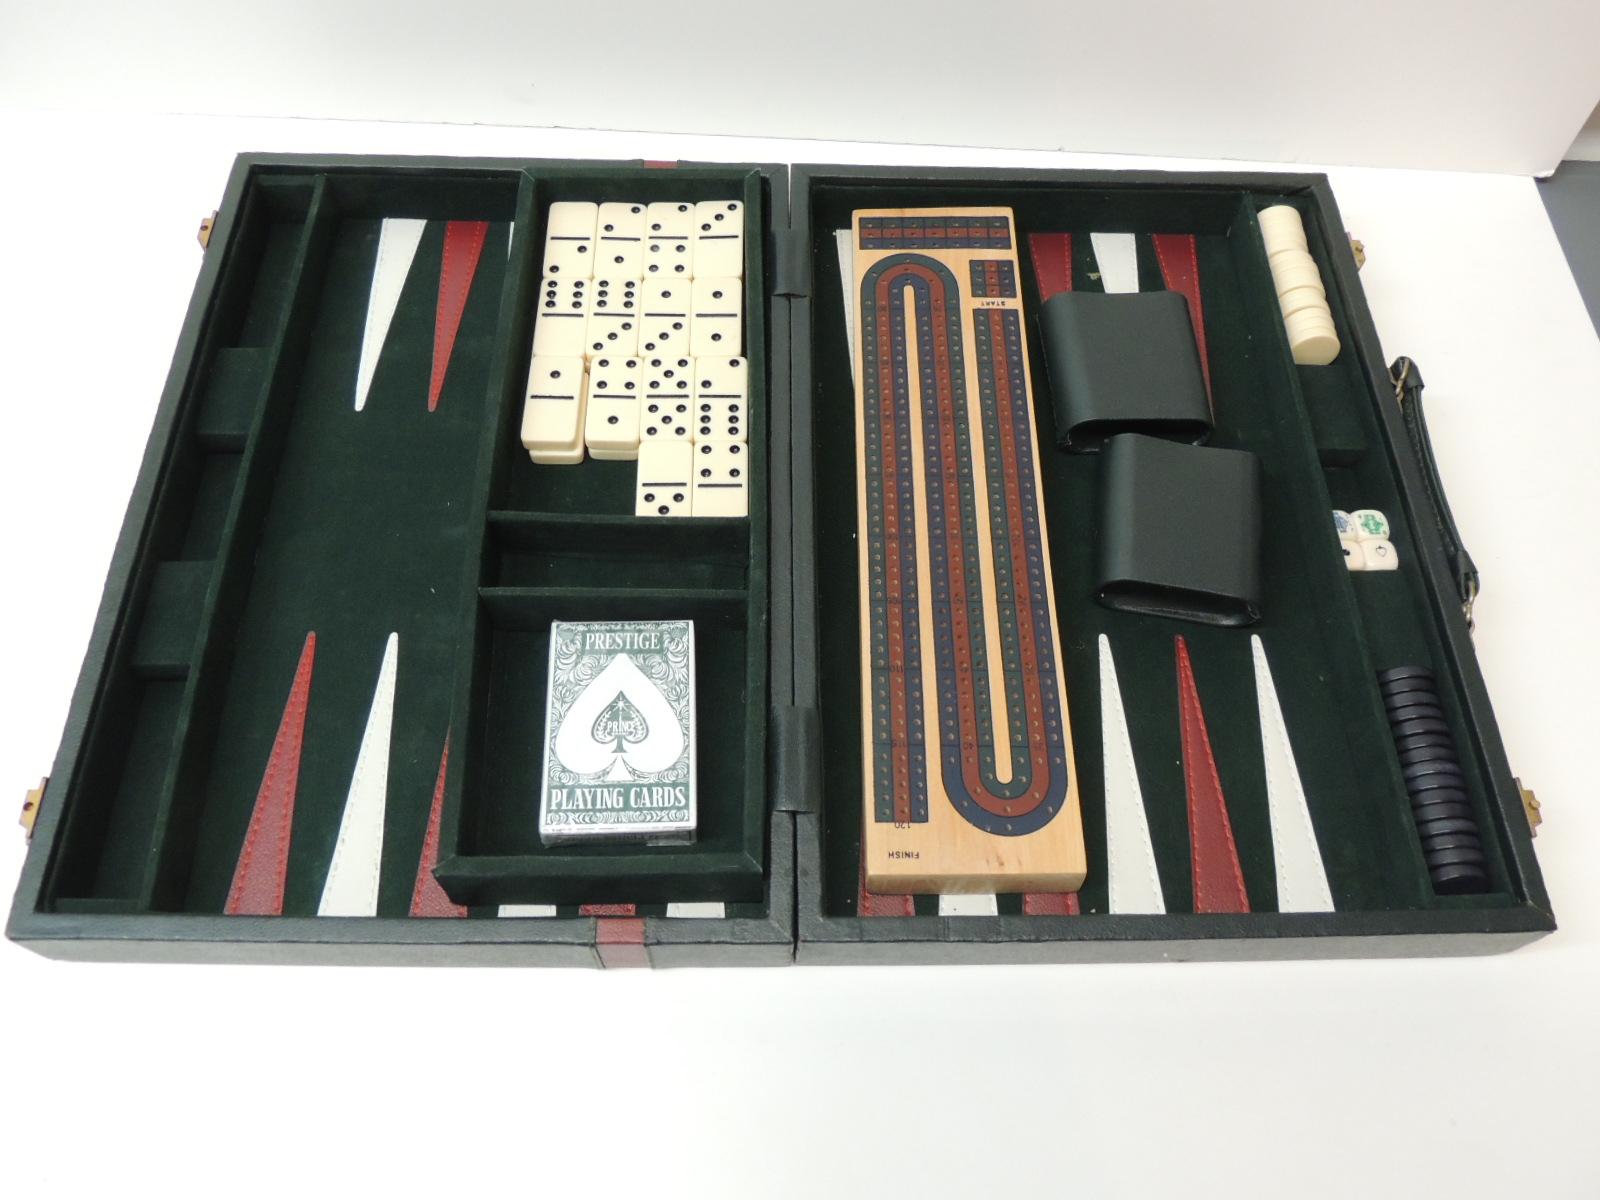 Mid size hunter green and red backgammon game set with dominoes, cards and cribbage included.
Red and white details inside with instruction on how to play all those games included in the set. Briefcase shape.
Size: 22.5 W x 16